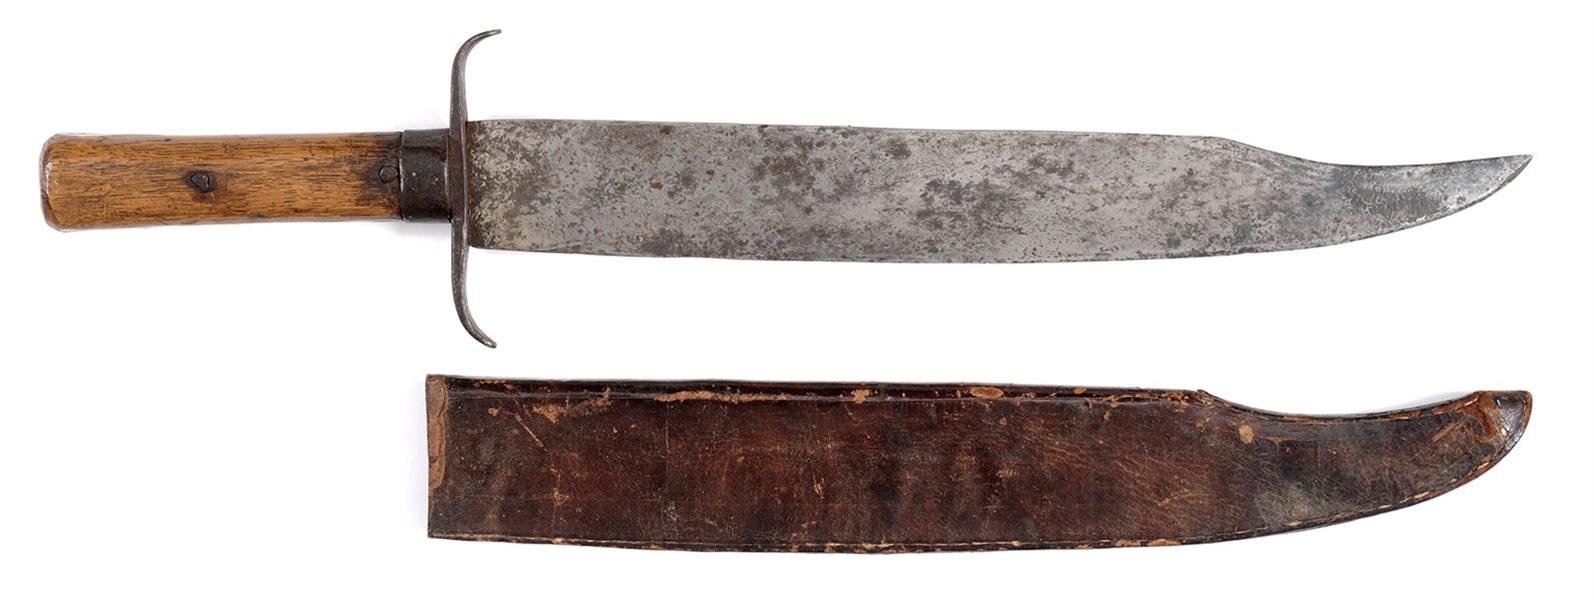 FINE AND MASSIVE CONFEDERATE CLIP-POINT BOWIE KNIFE WITH ORIGINAL SCABBARD.                                                                                                                             